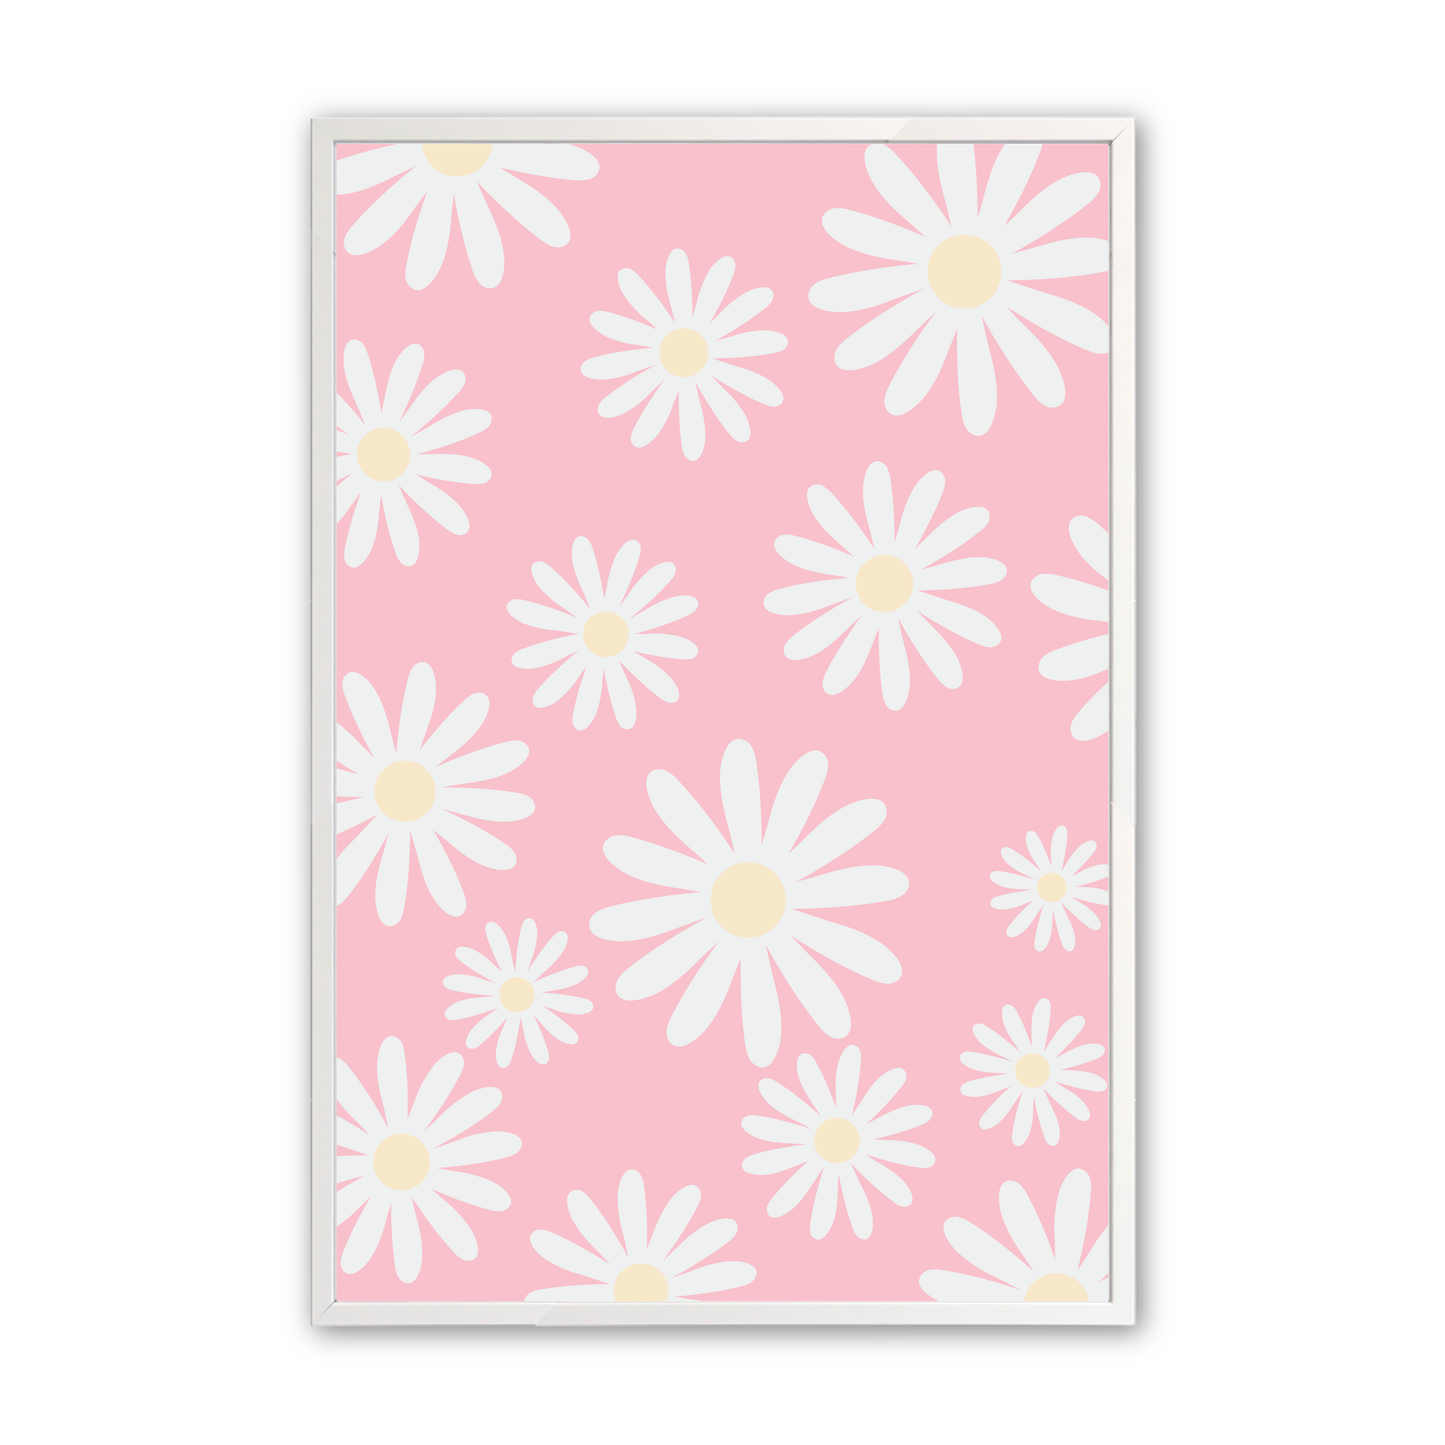 [color:Opaque White], Print 2 - Daisy's on a pink background